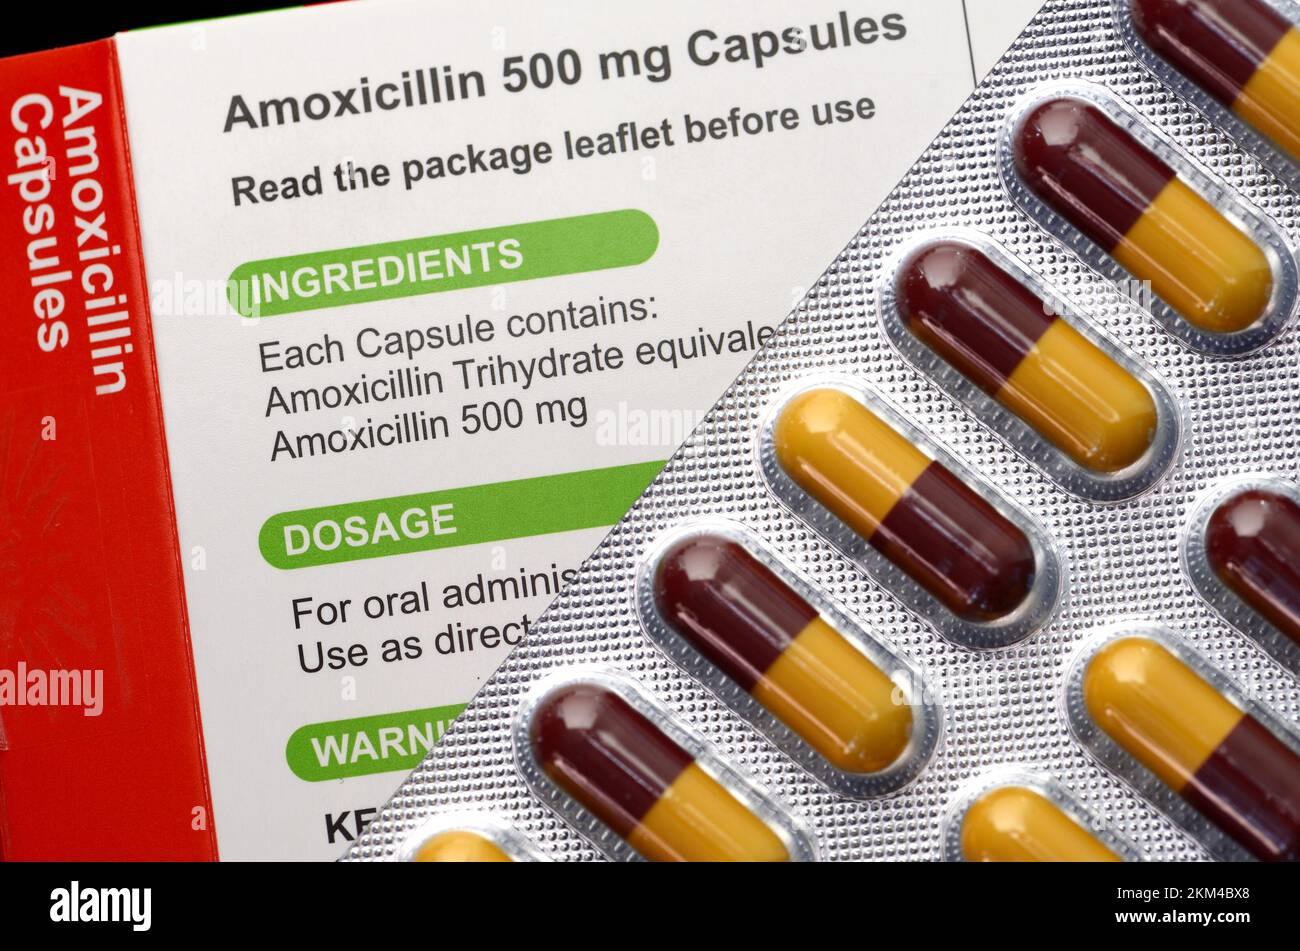 Amoxicillin capsules - penicillin-based antibiotic for treating infections Stock Photo